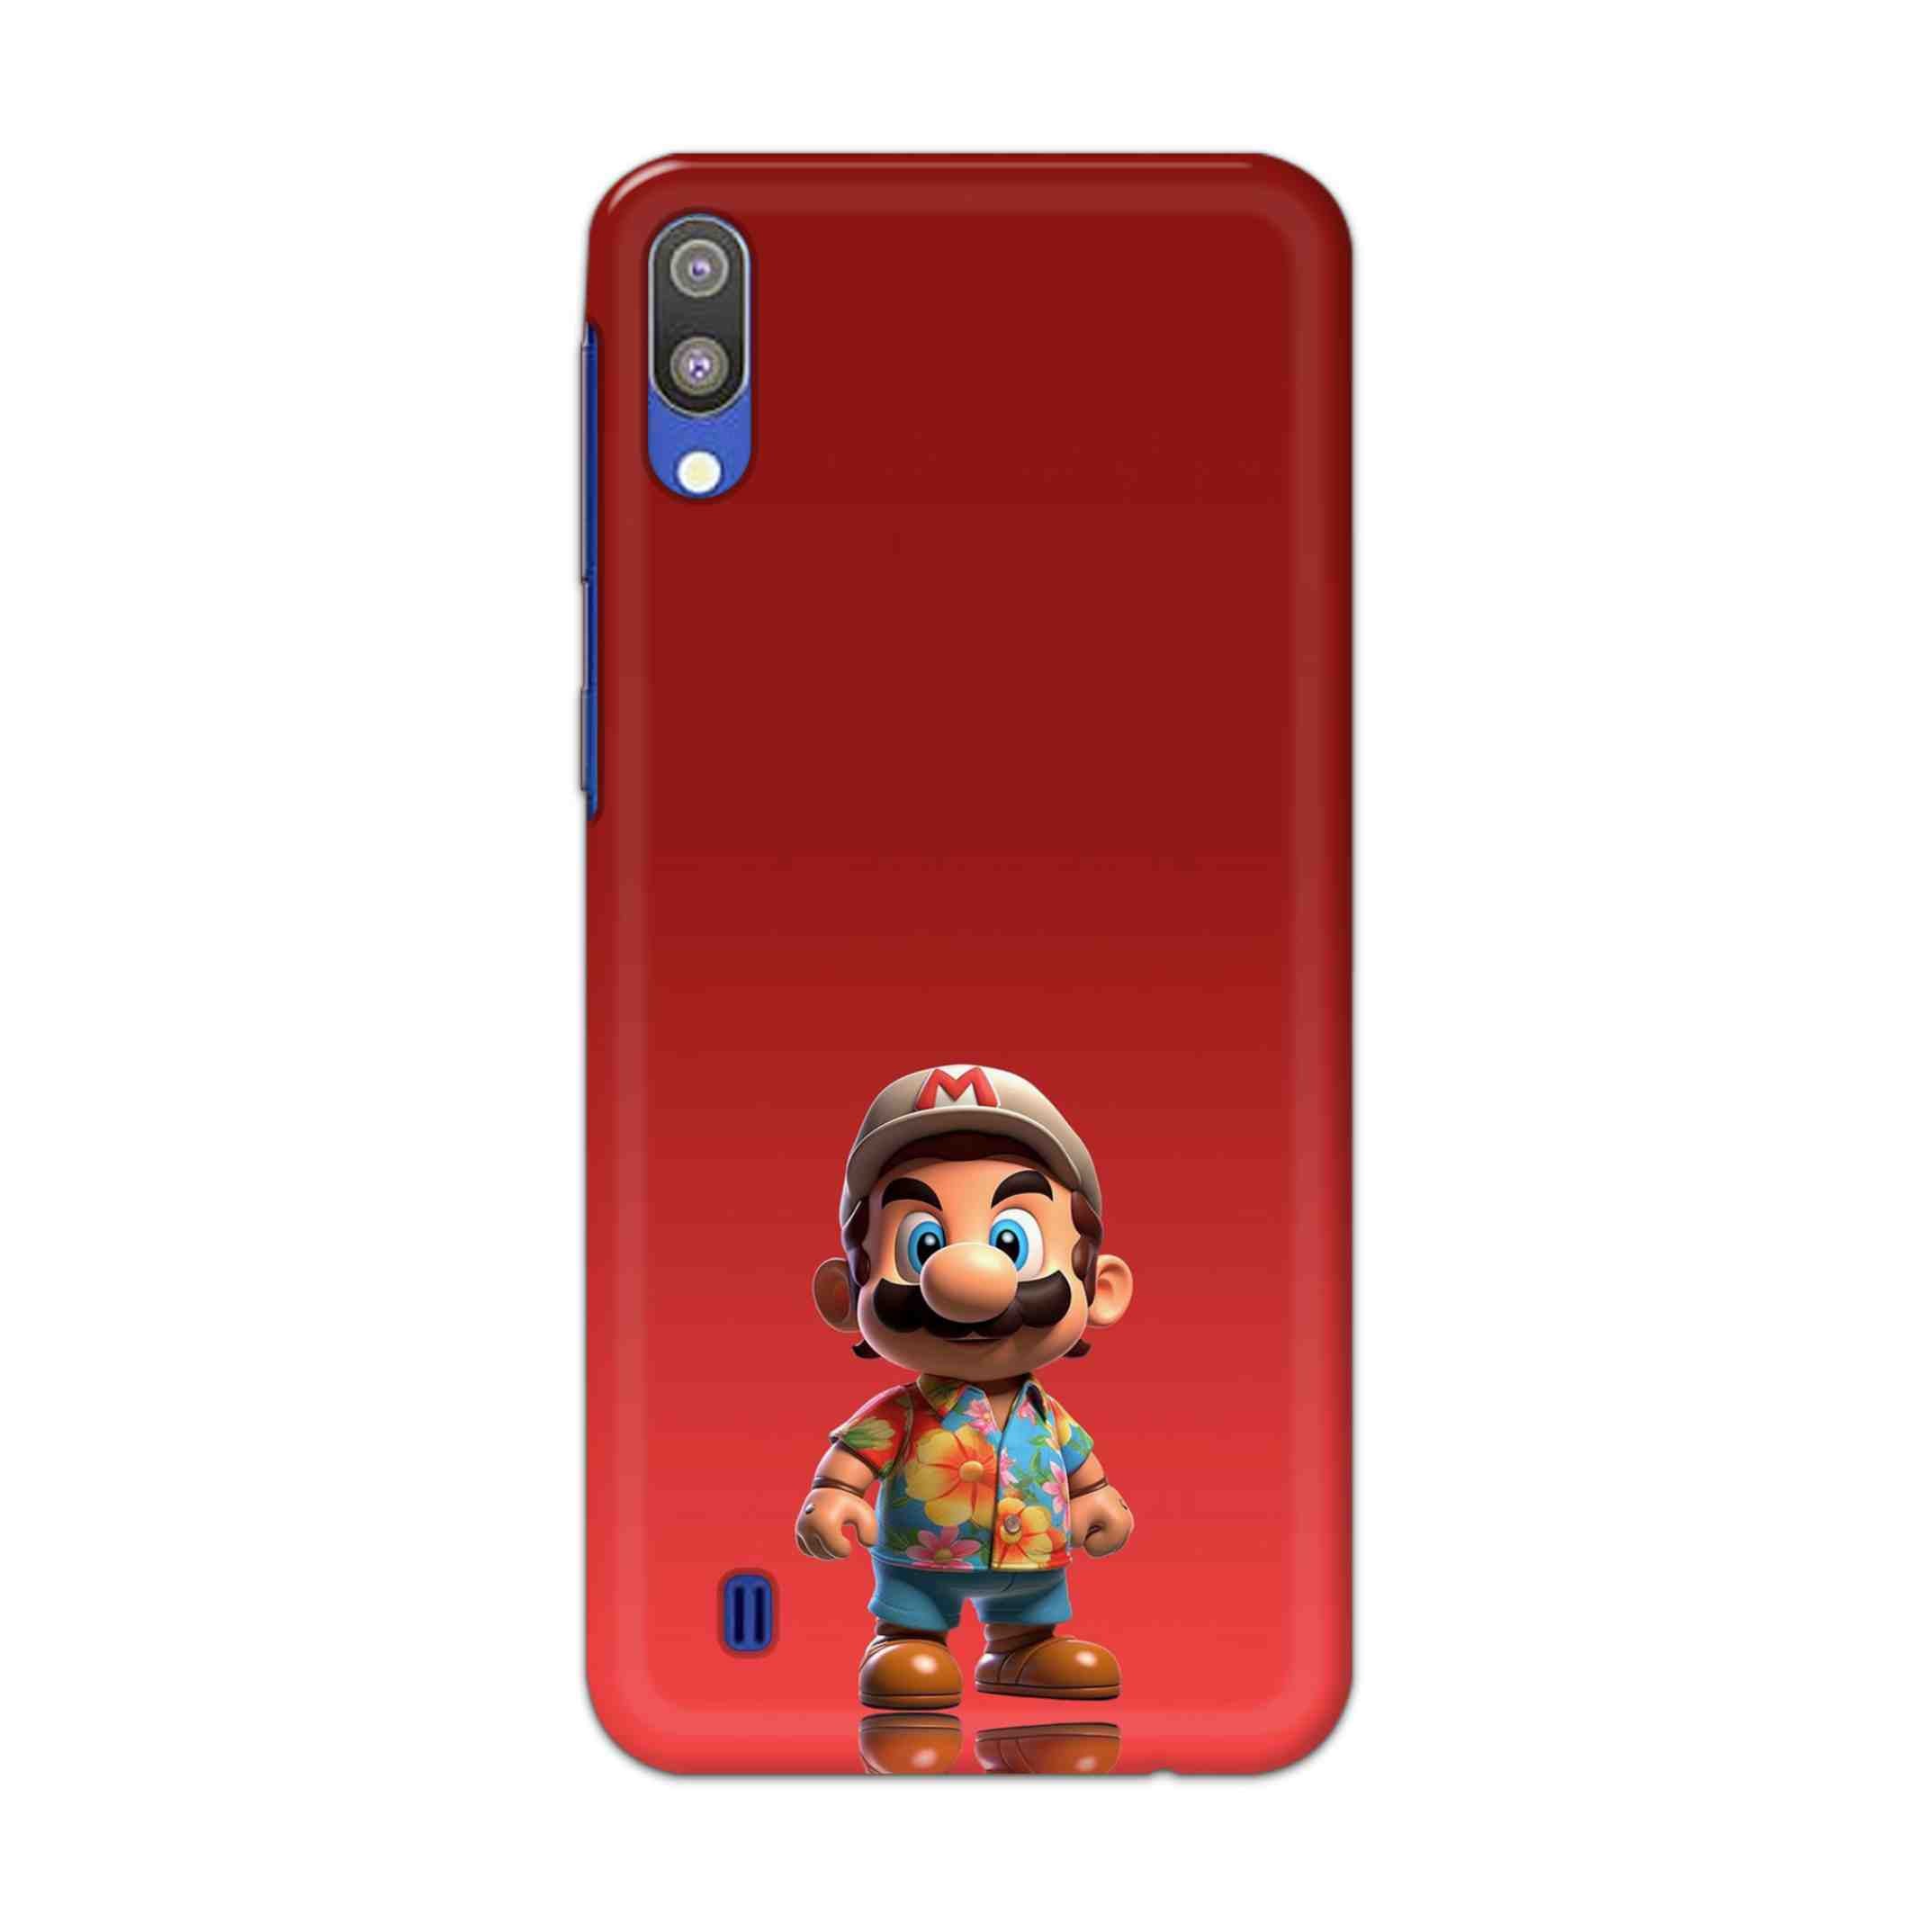 Buy Mario Hard Back Mobile Phone Case Cover For Samsung Galaxy M10 Online